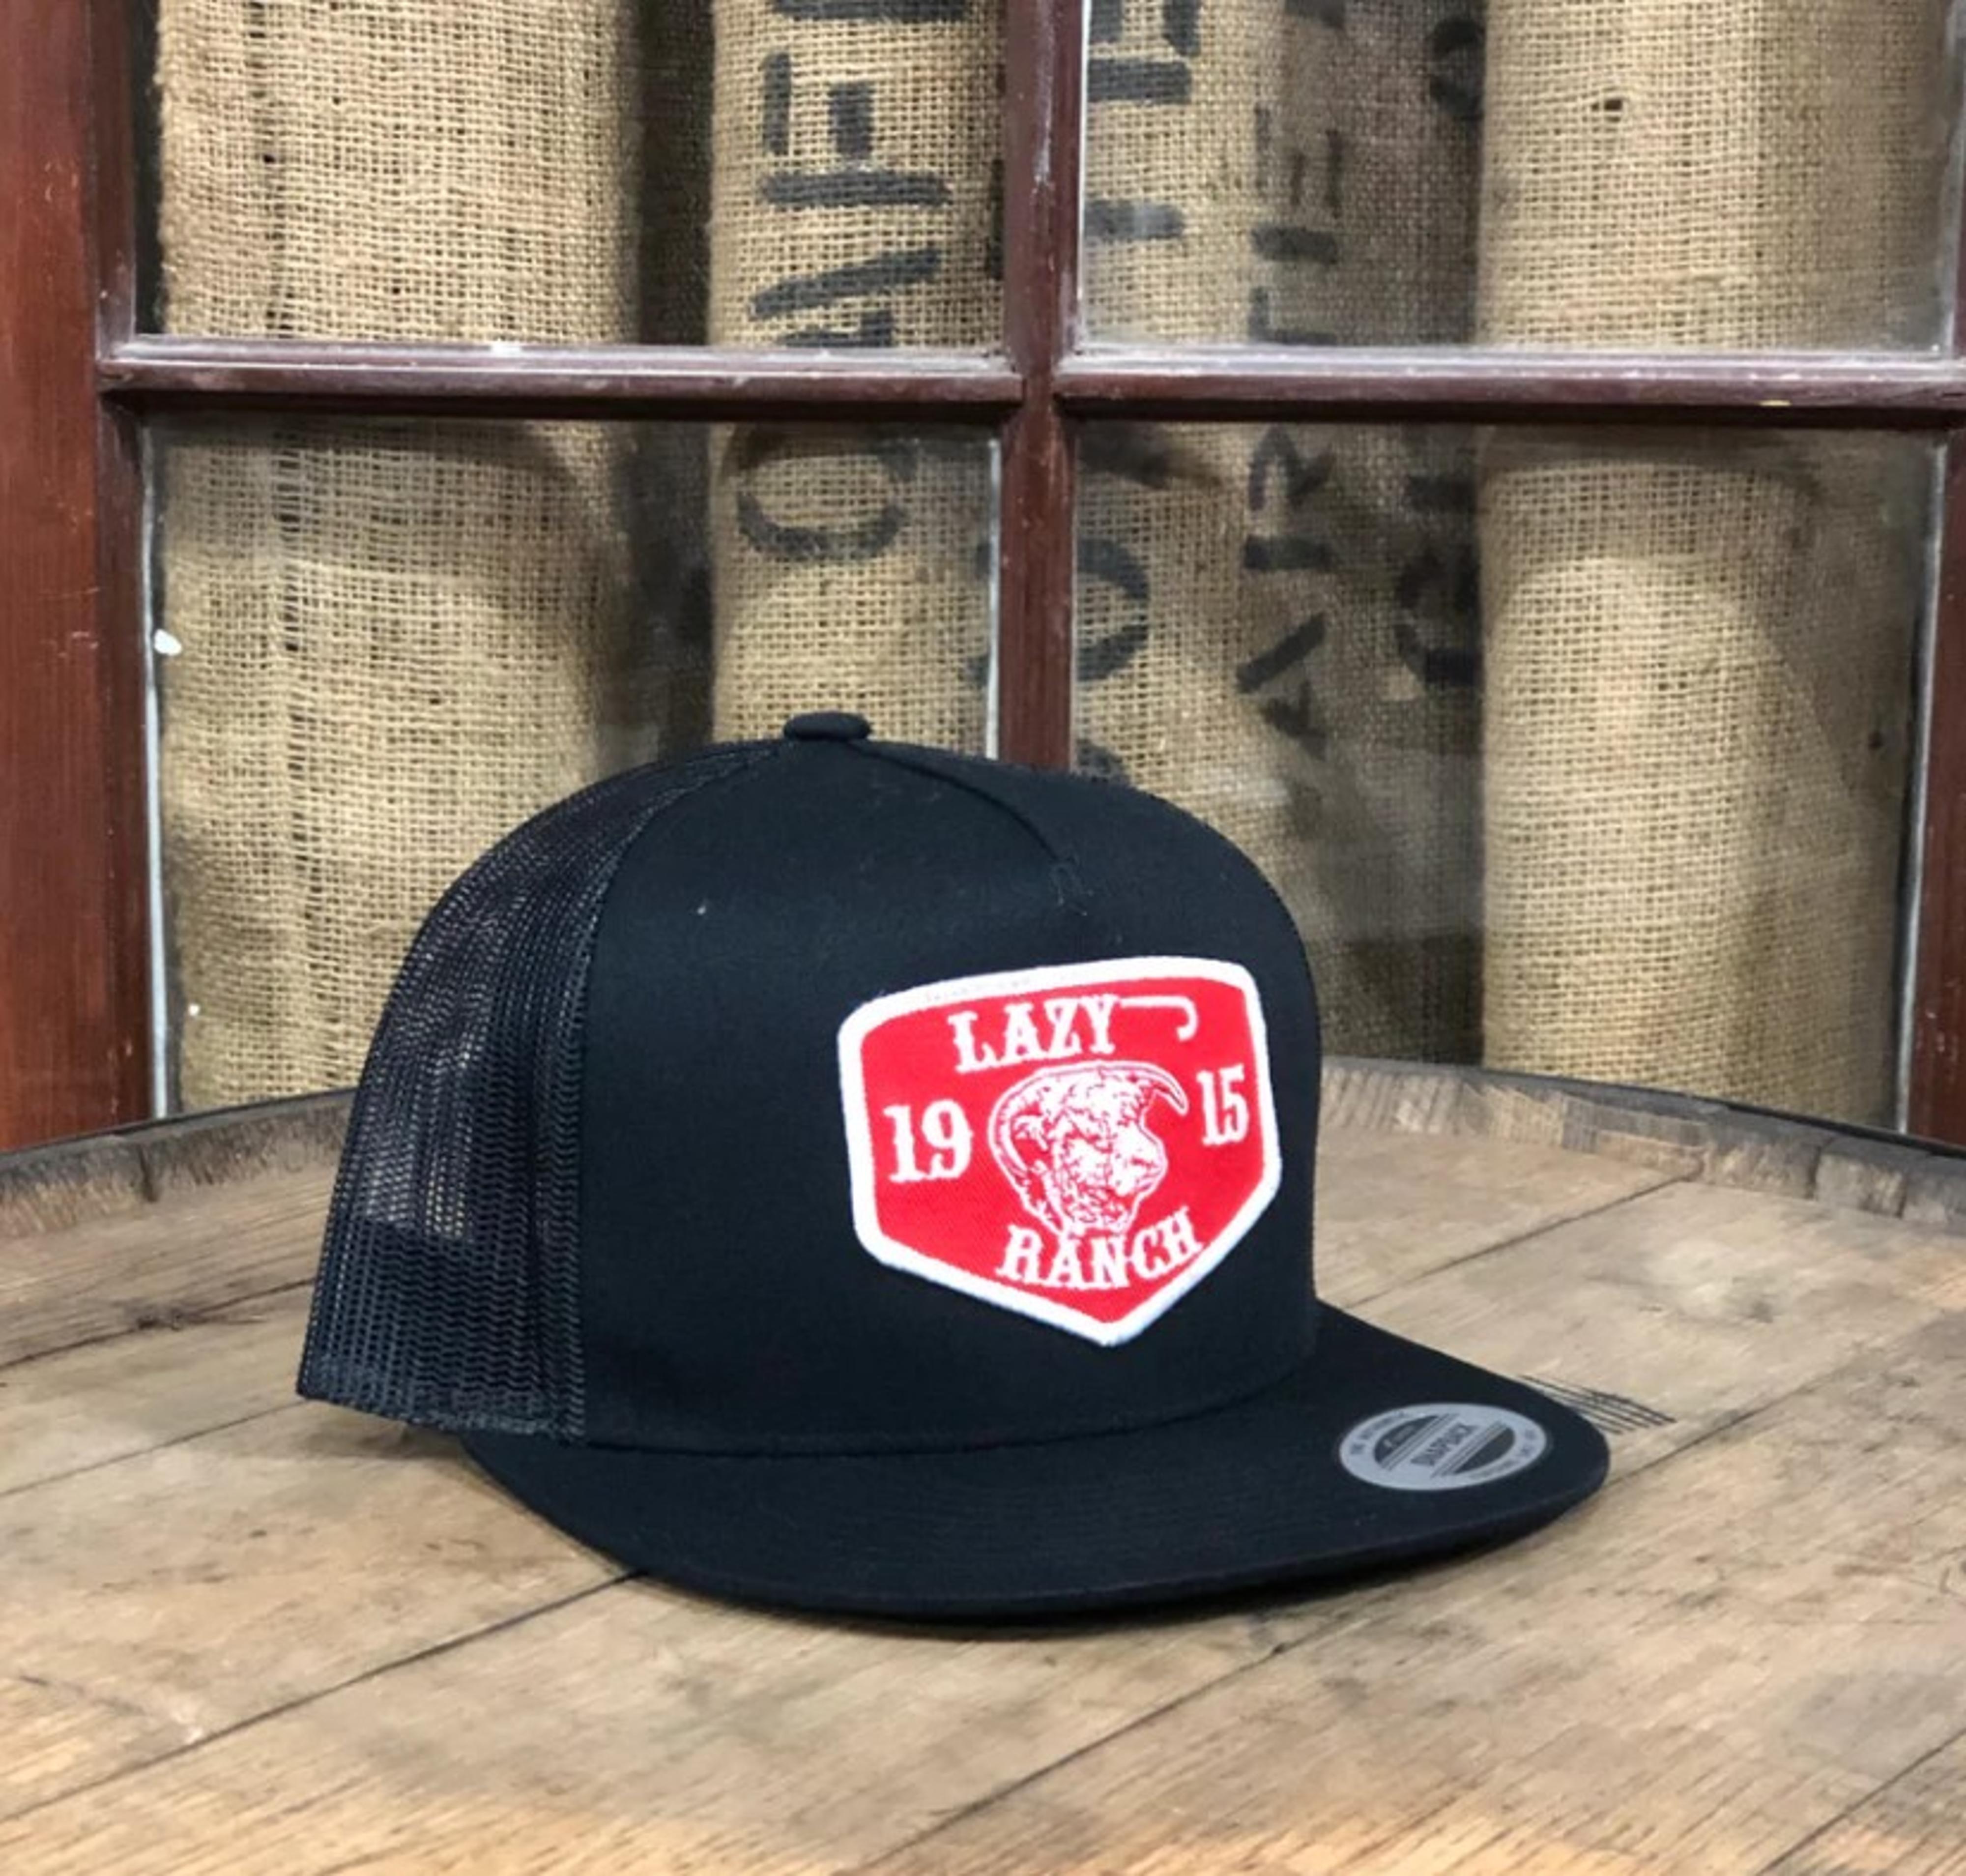  Red Ranch Patch Cap